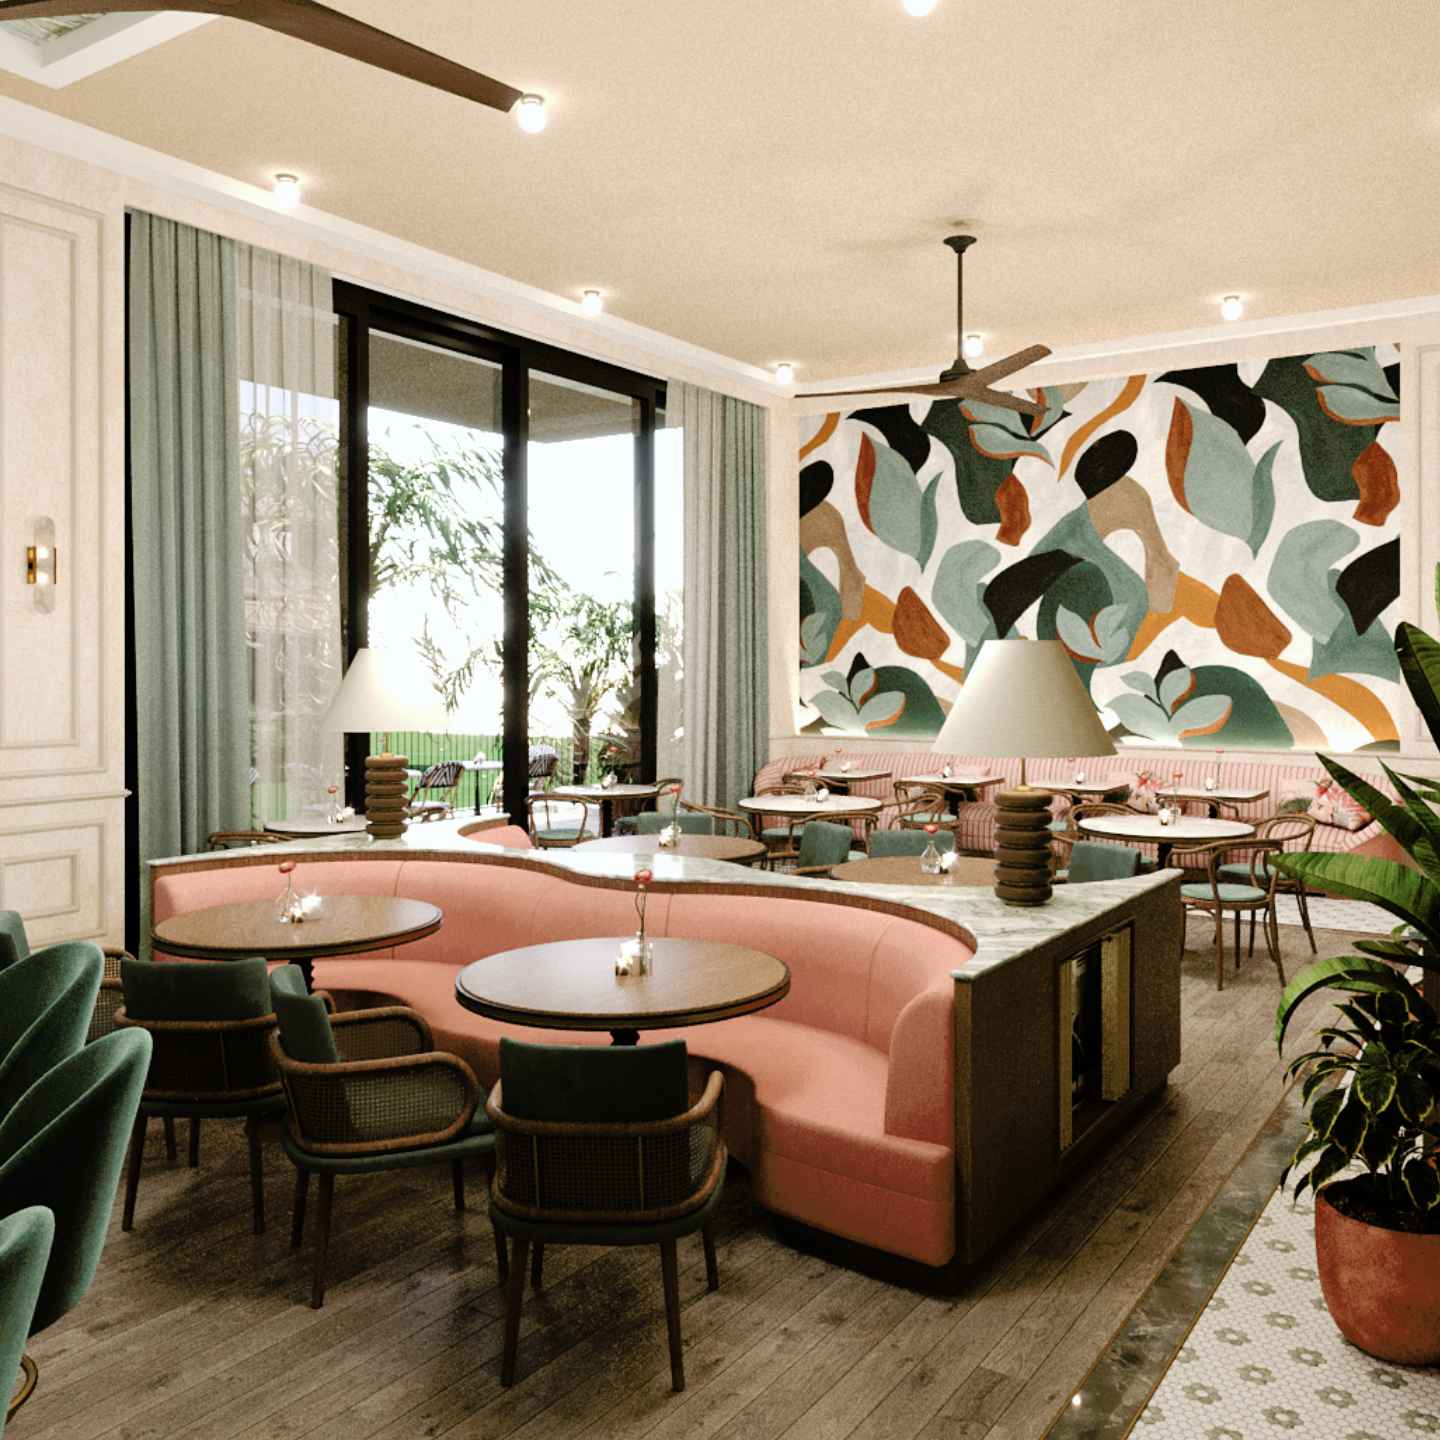 Dining room with large pink booth, small round wooden tables, and green chairs, with colorful wallpaper in the background and sliding glass doors